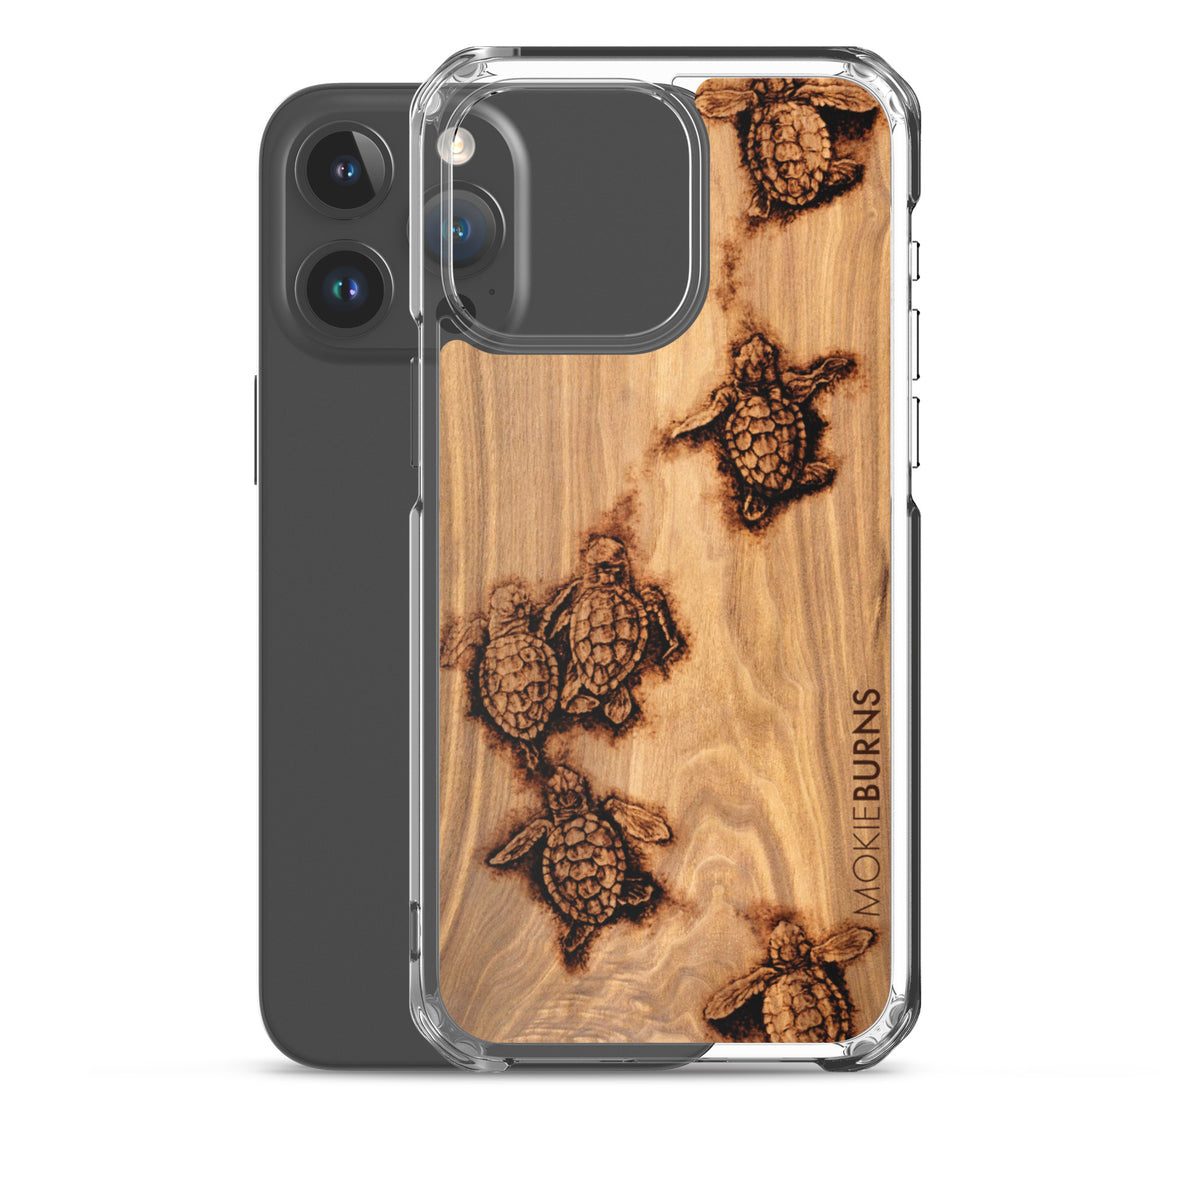 Baby Sea Turtles - iPhone Case [all sizes] - FREE SHIPPING